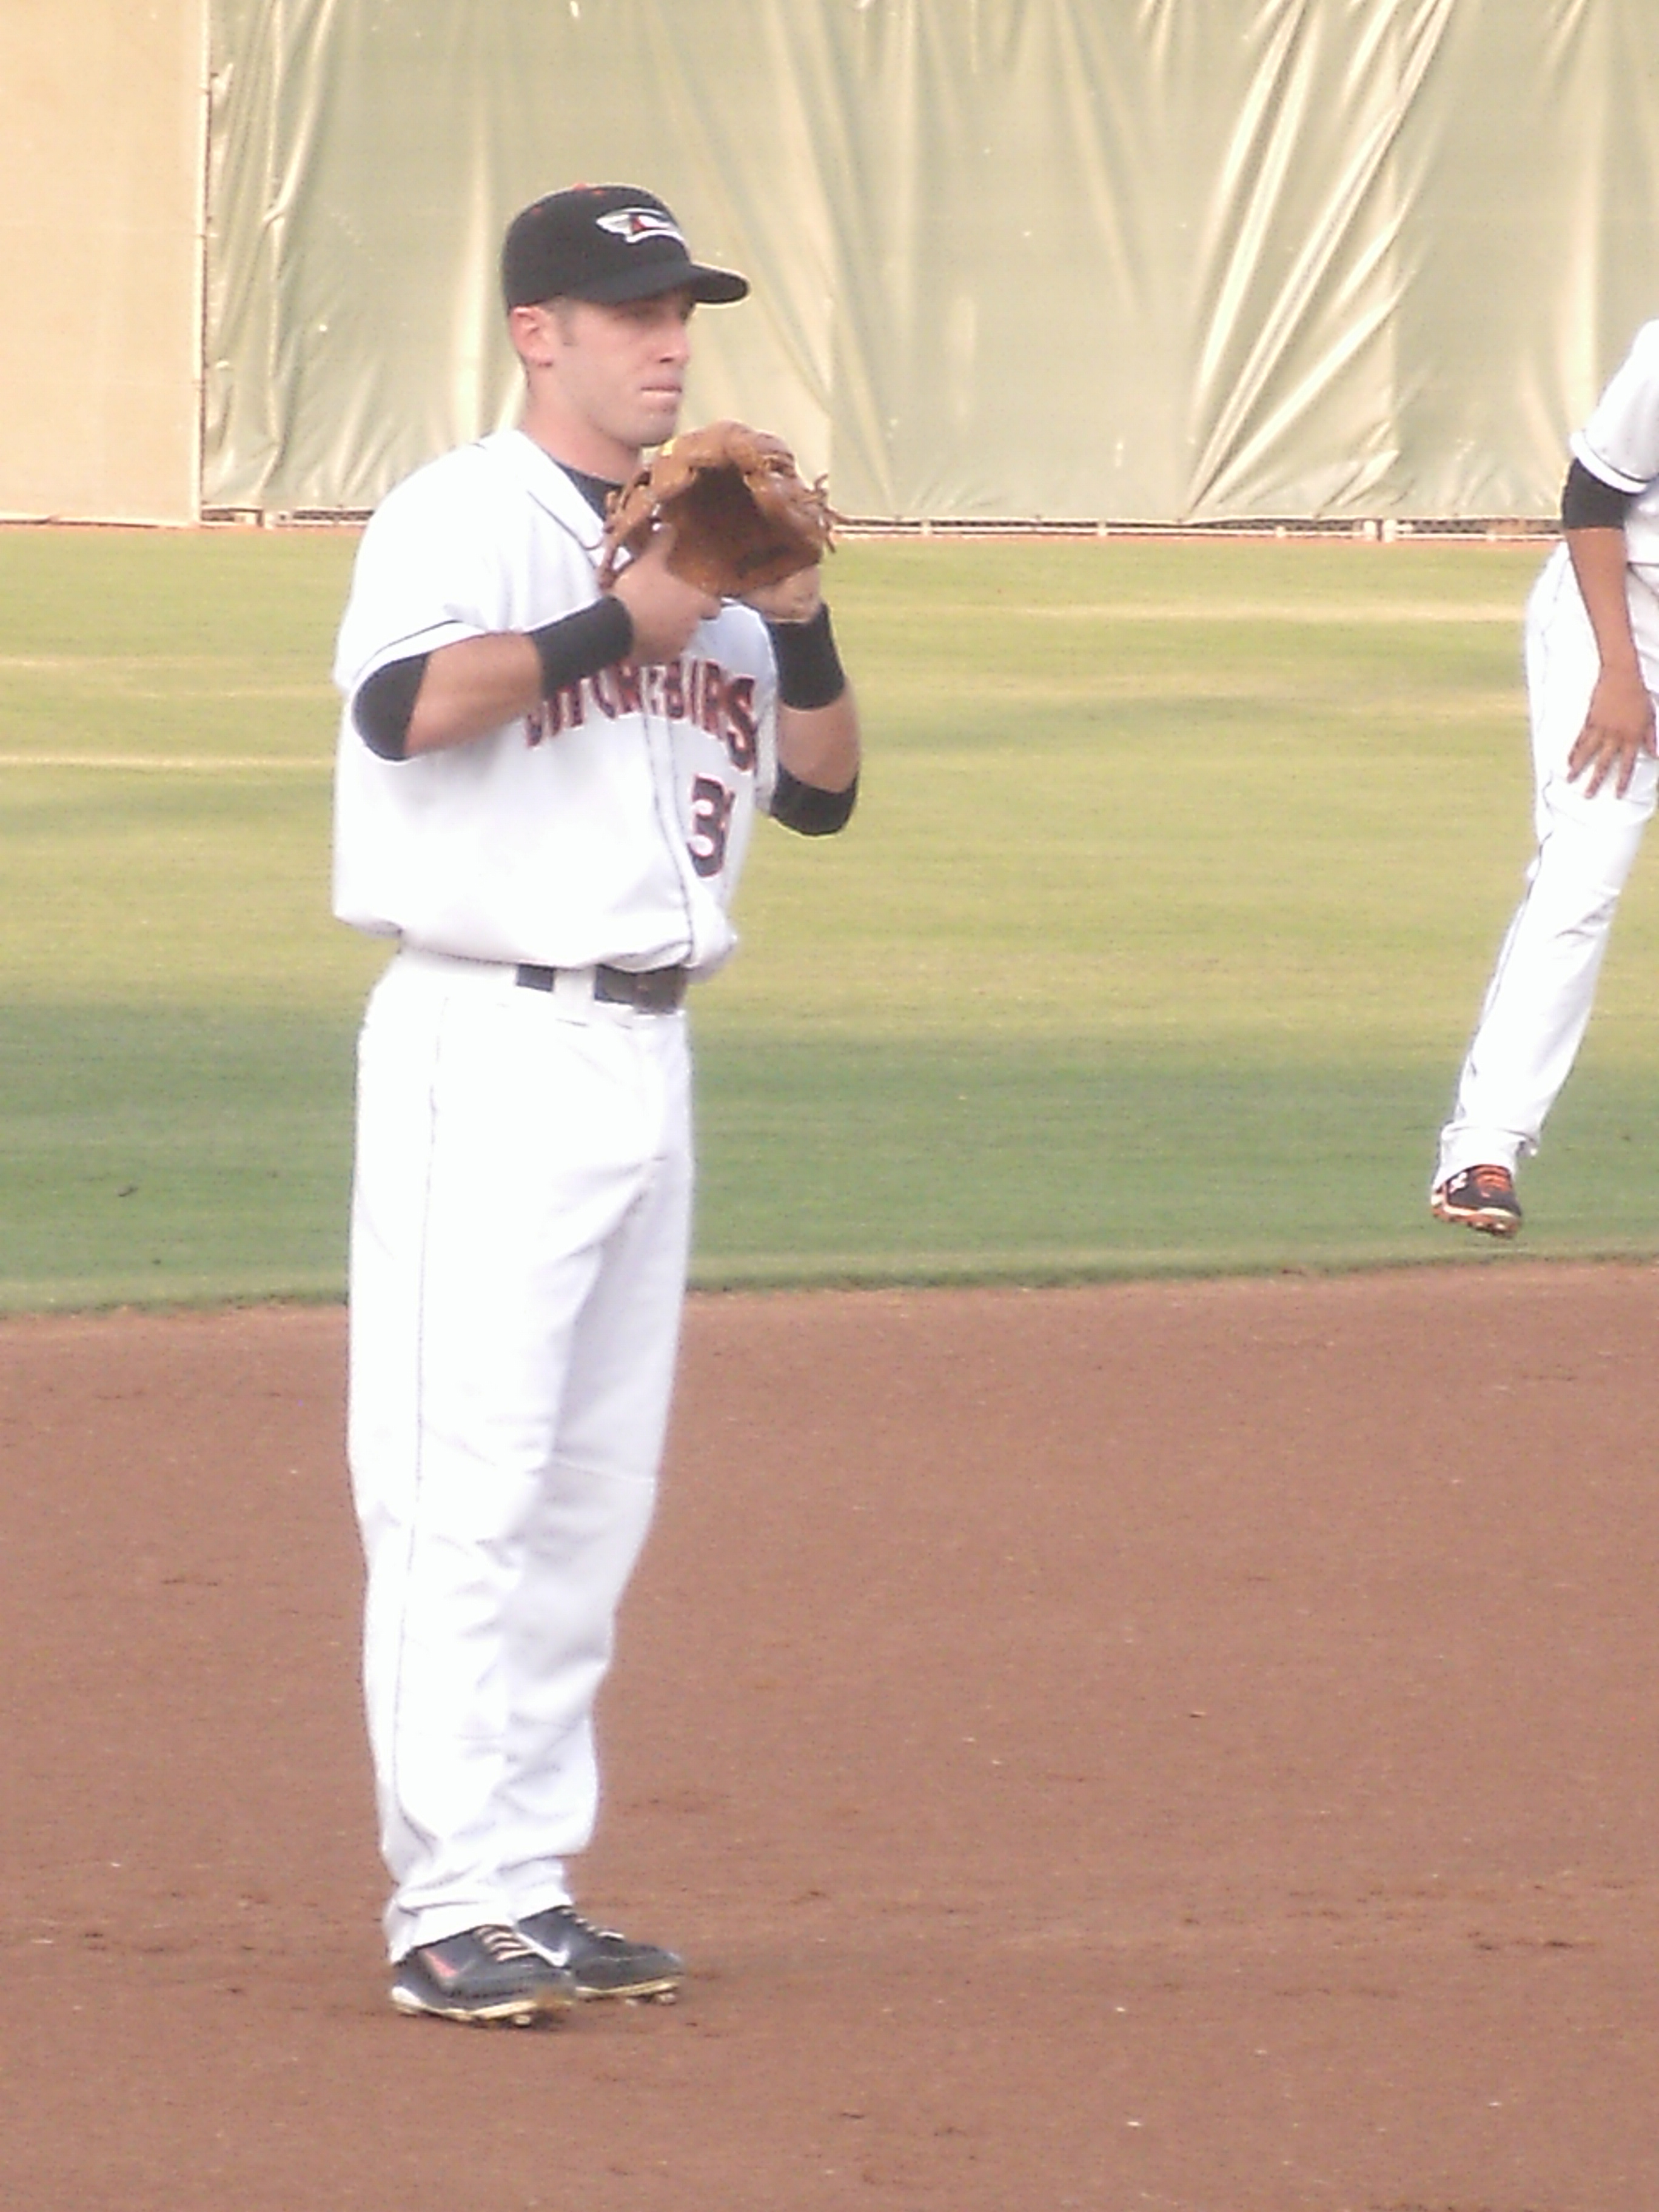 Rooney made his home debut June 9 against Hagerstown.